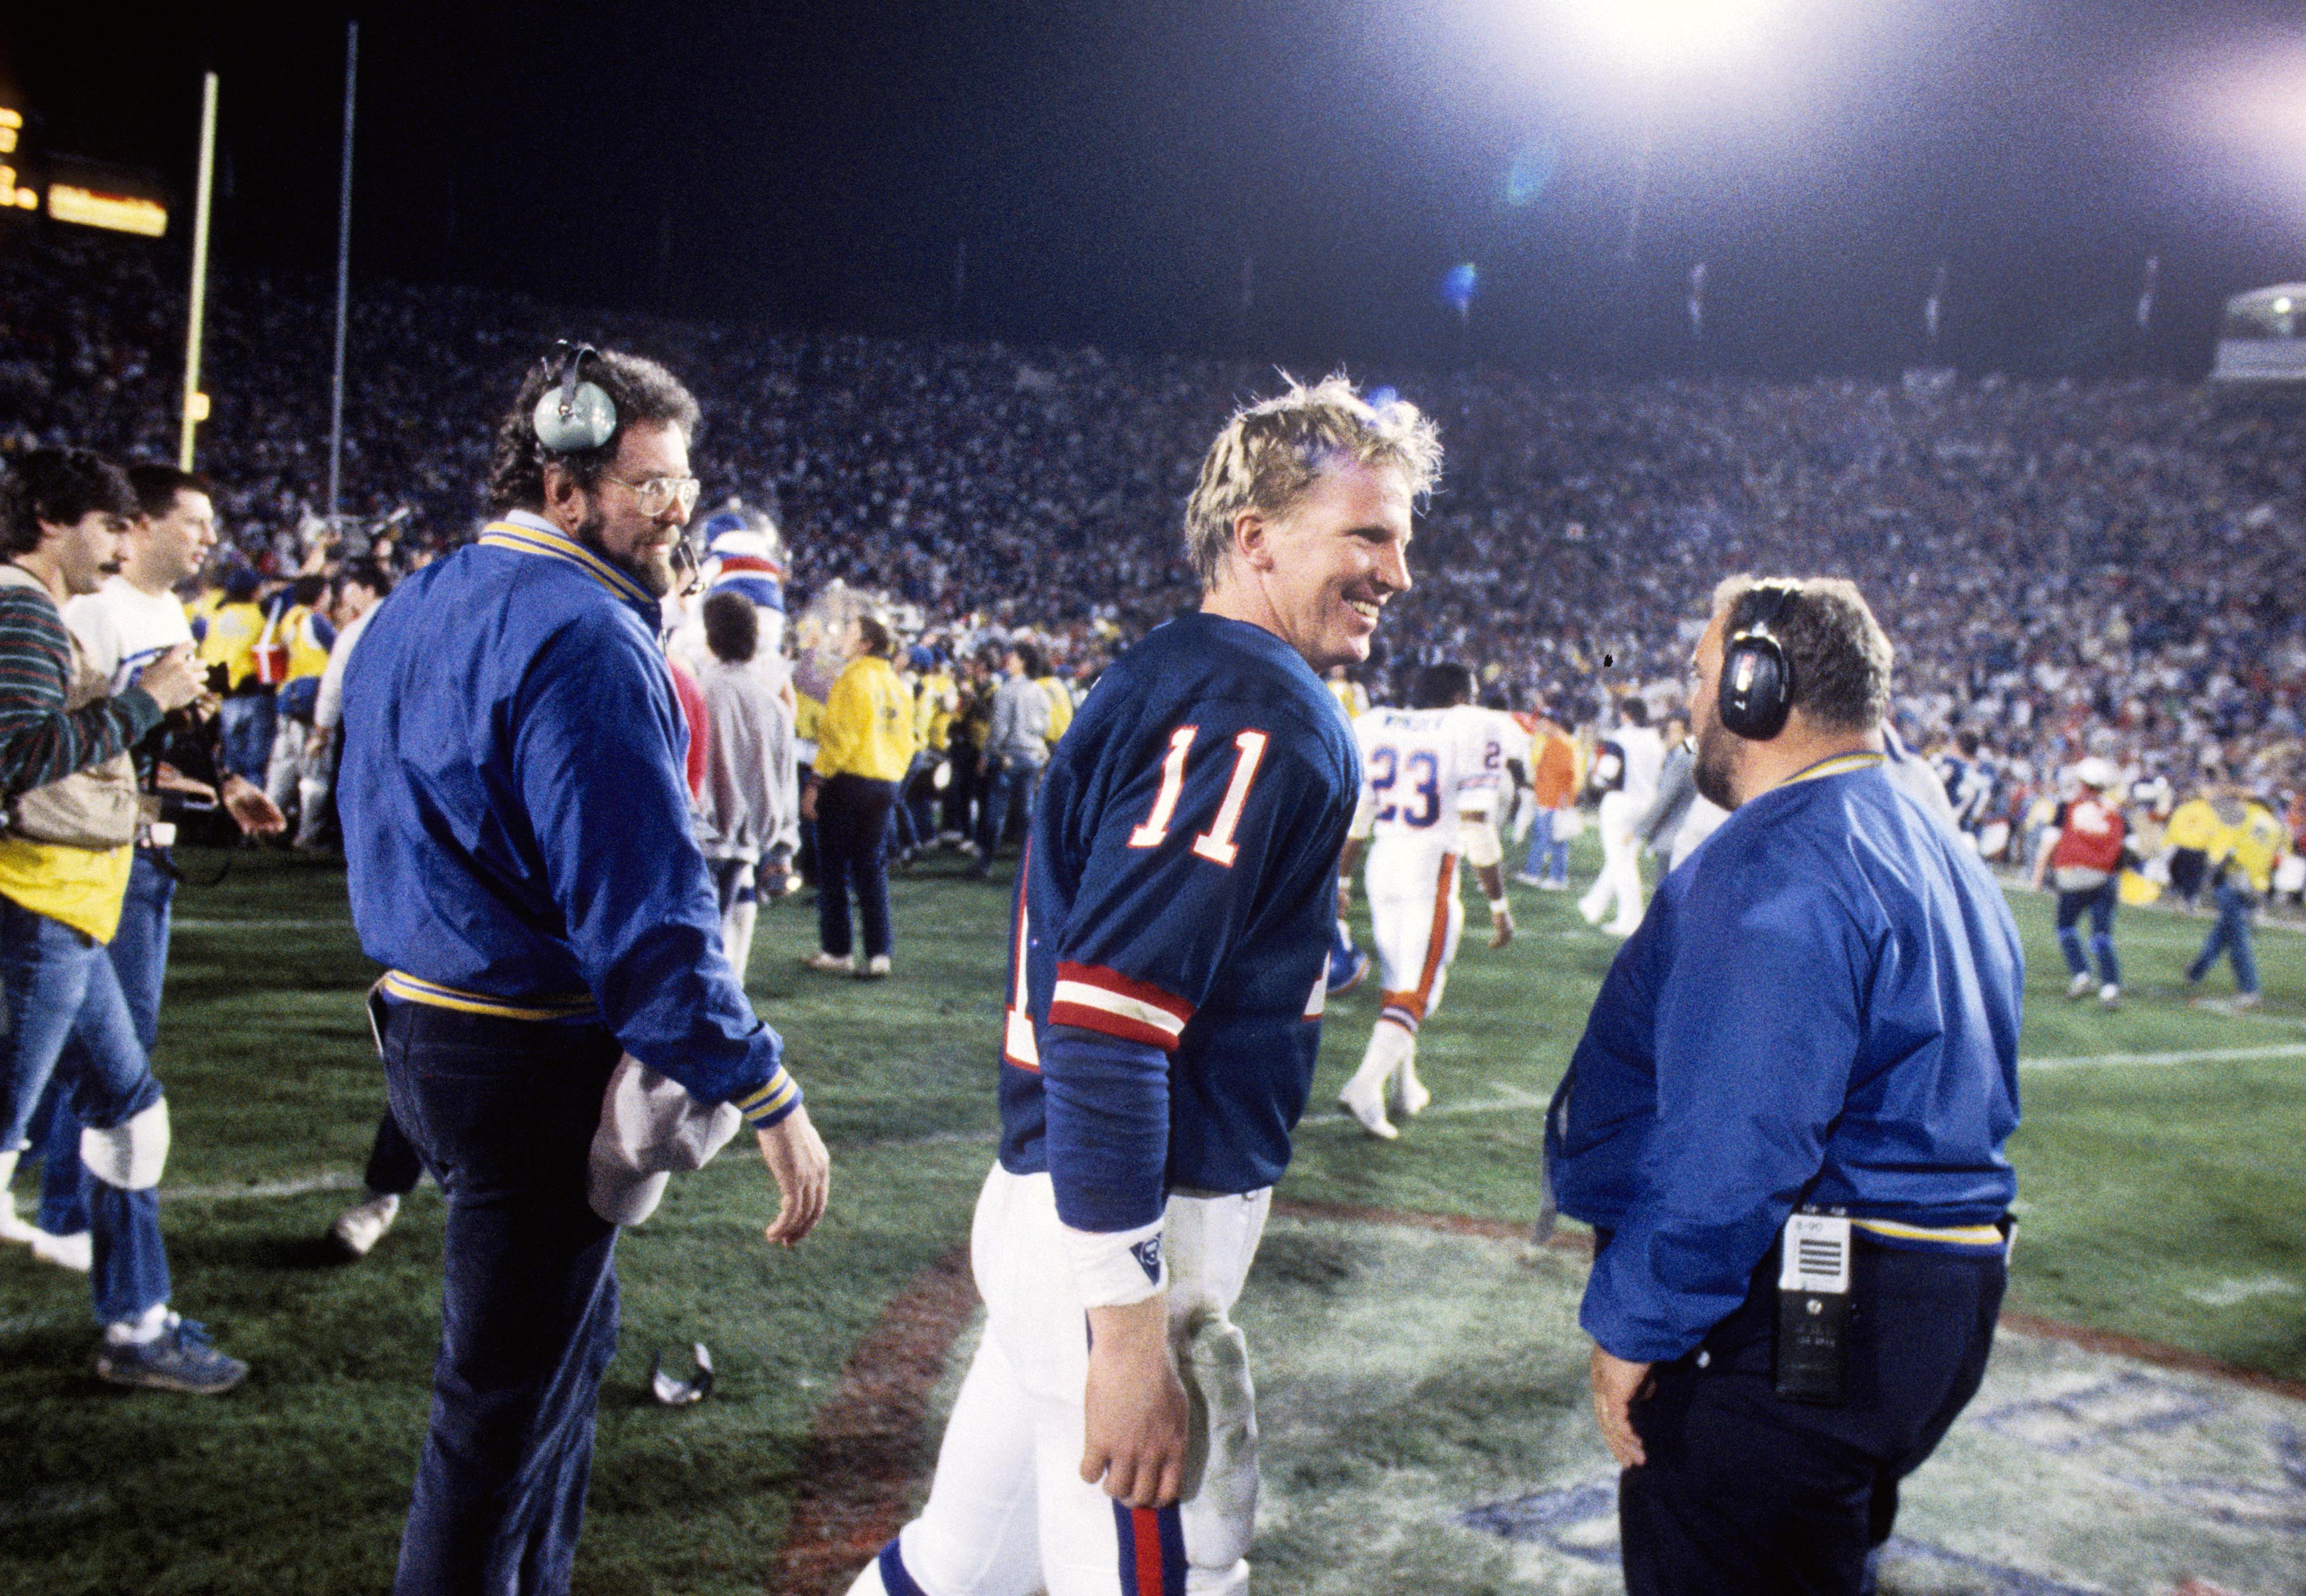 New York Giants quarterback Phil Simms (11) celebrates after defeating the Denver Broncos in Super Bowl XXI at the Rose Bowl. The Giants defeated the Broncos 39-20